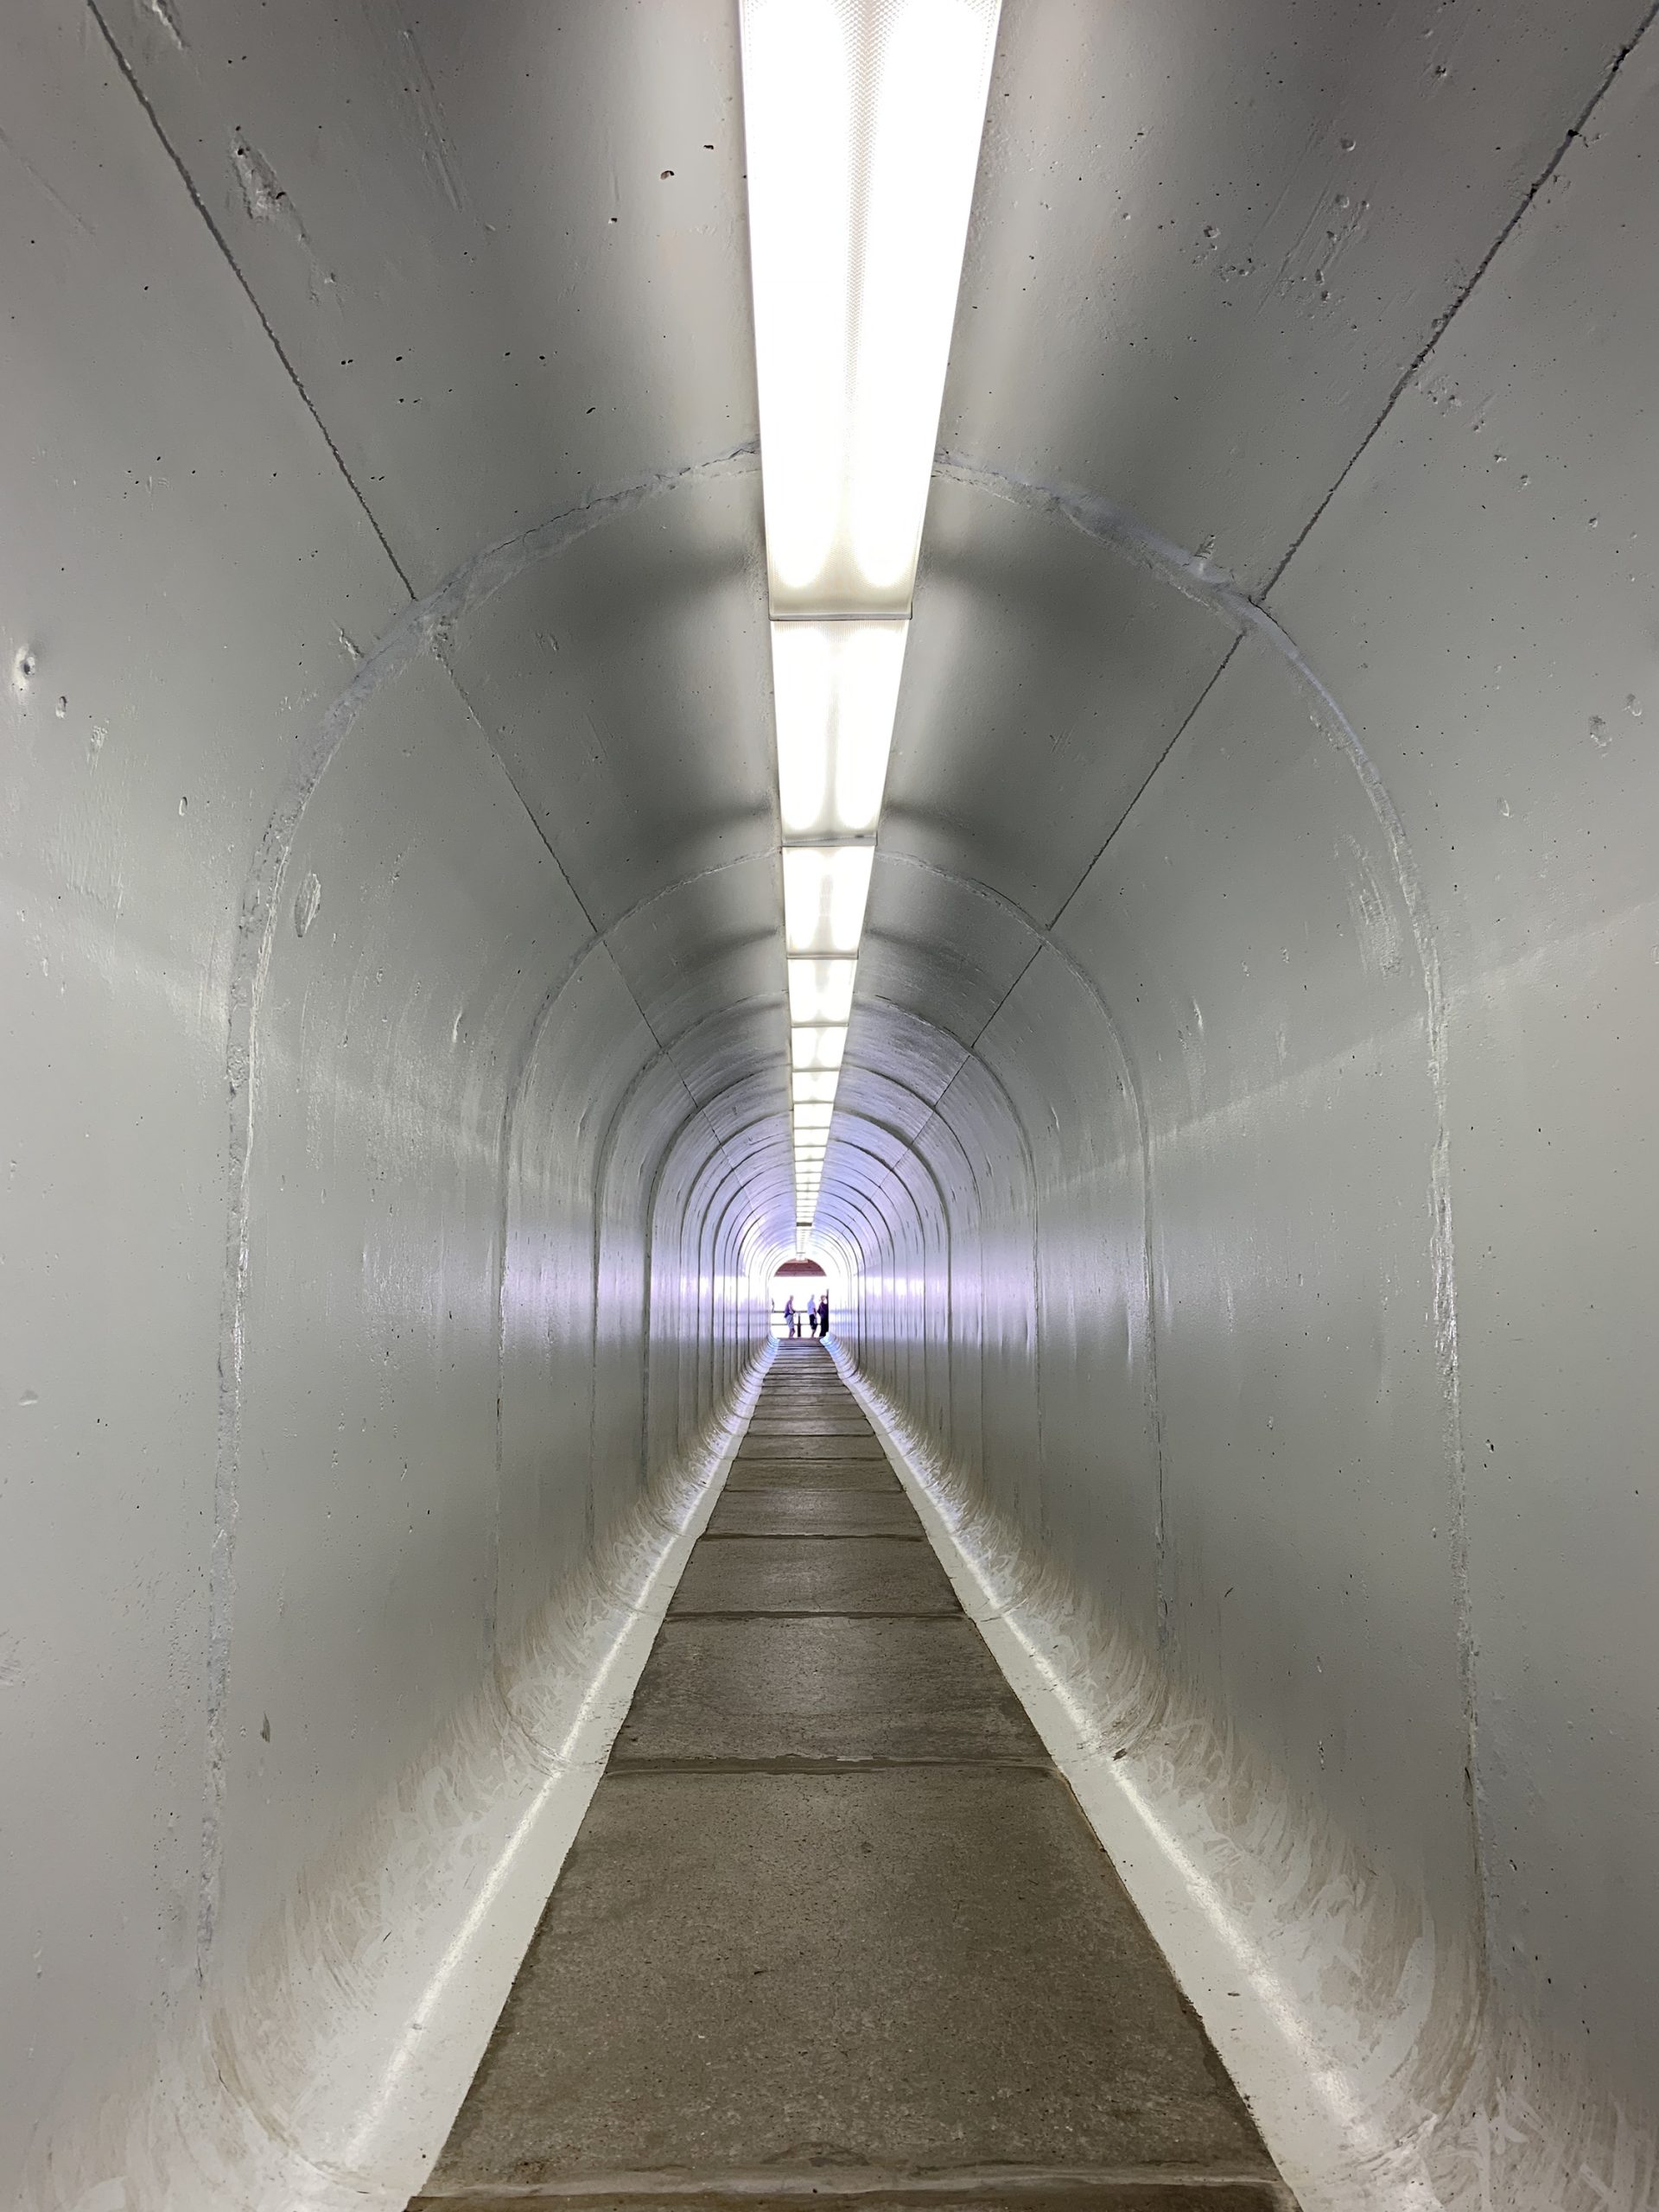 A picture of the inside of a concrete tunnel